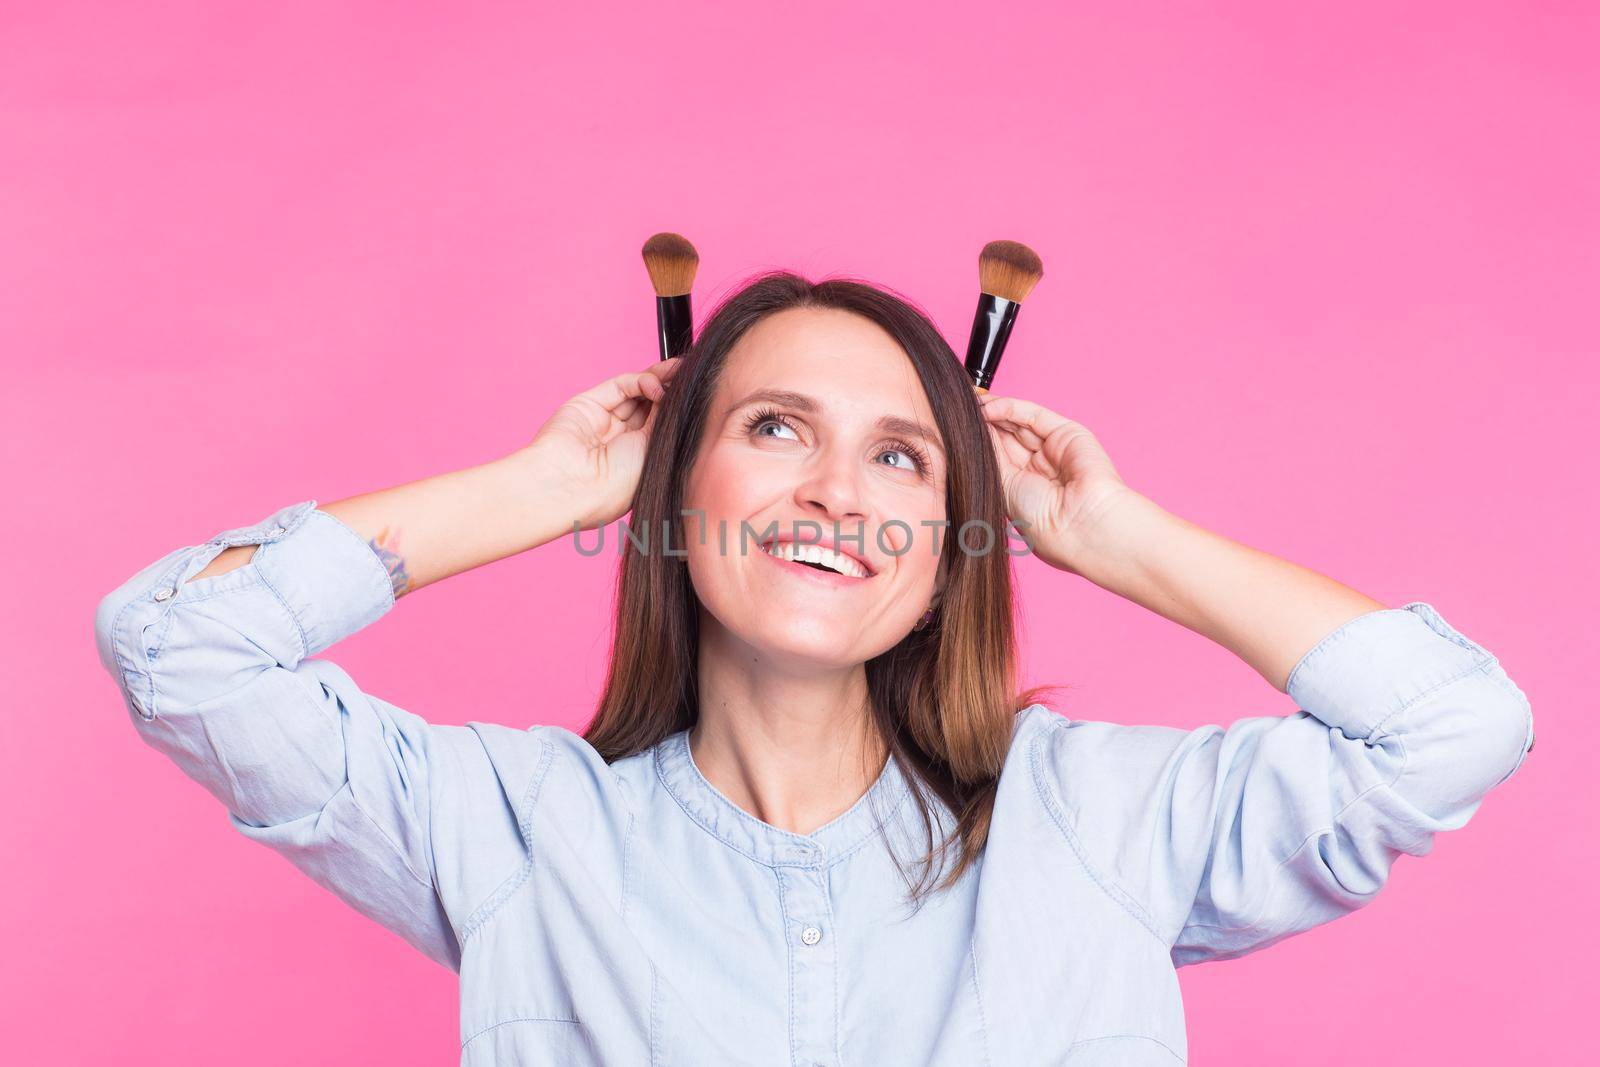 Funny makeup artist with brushes on pink background.